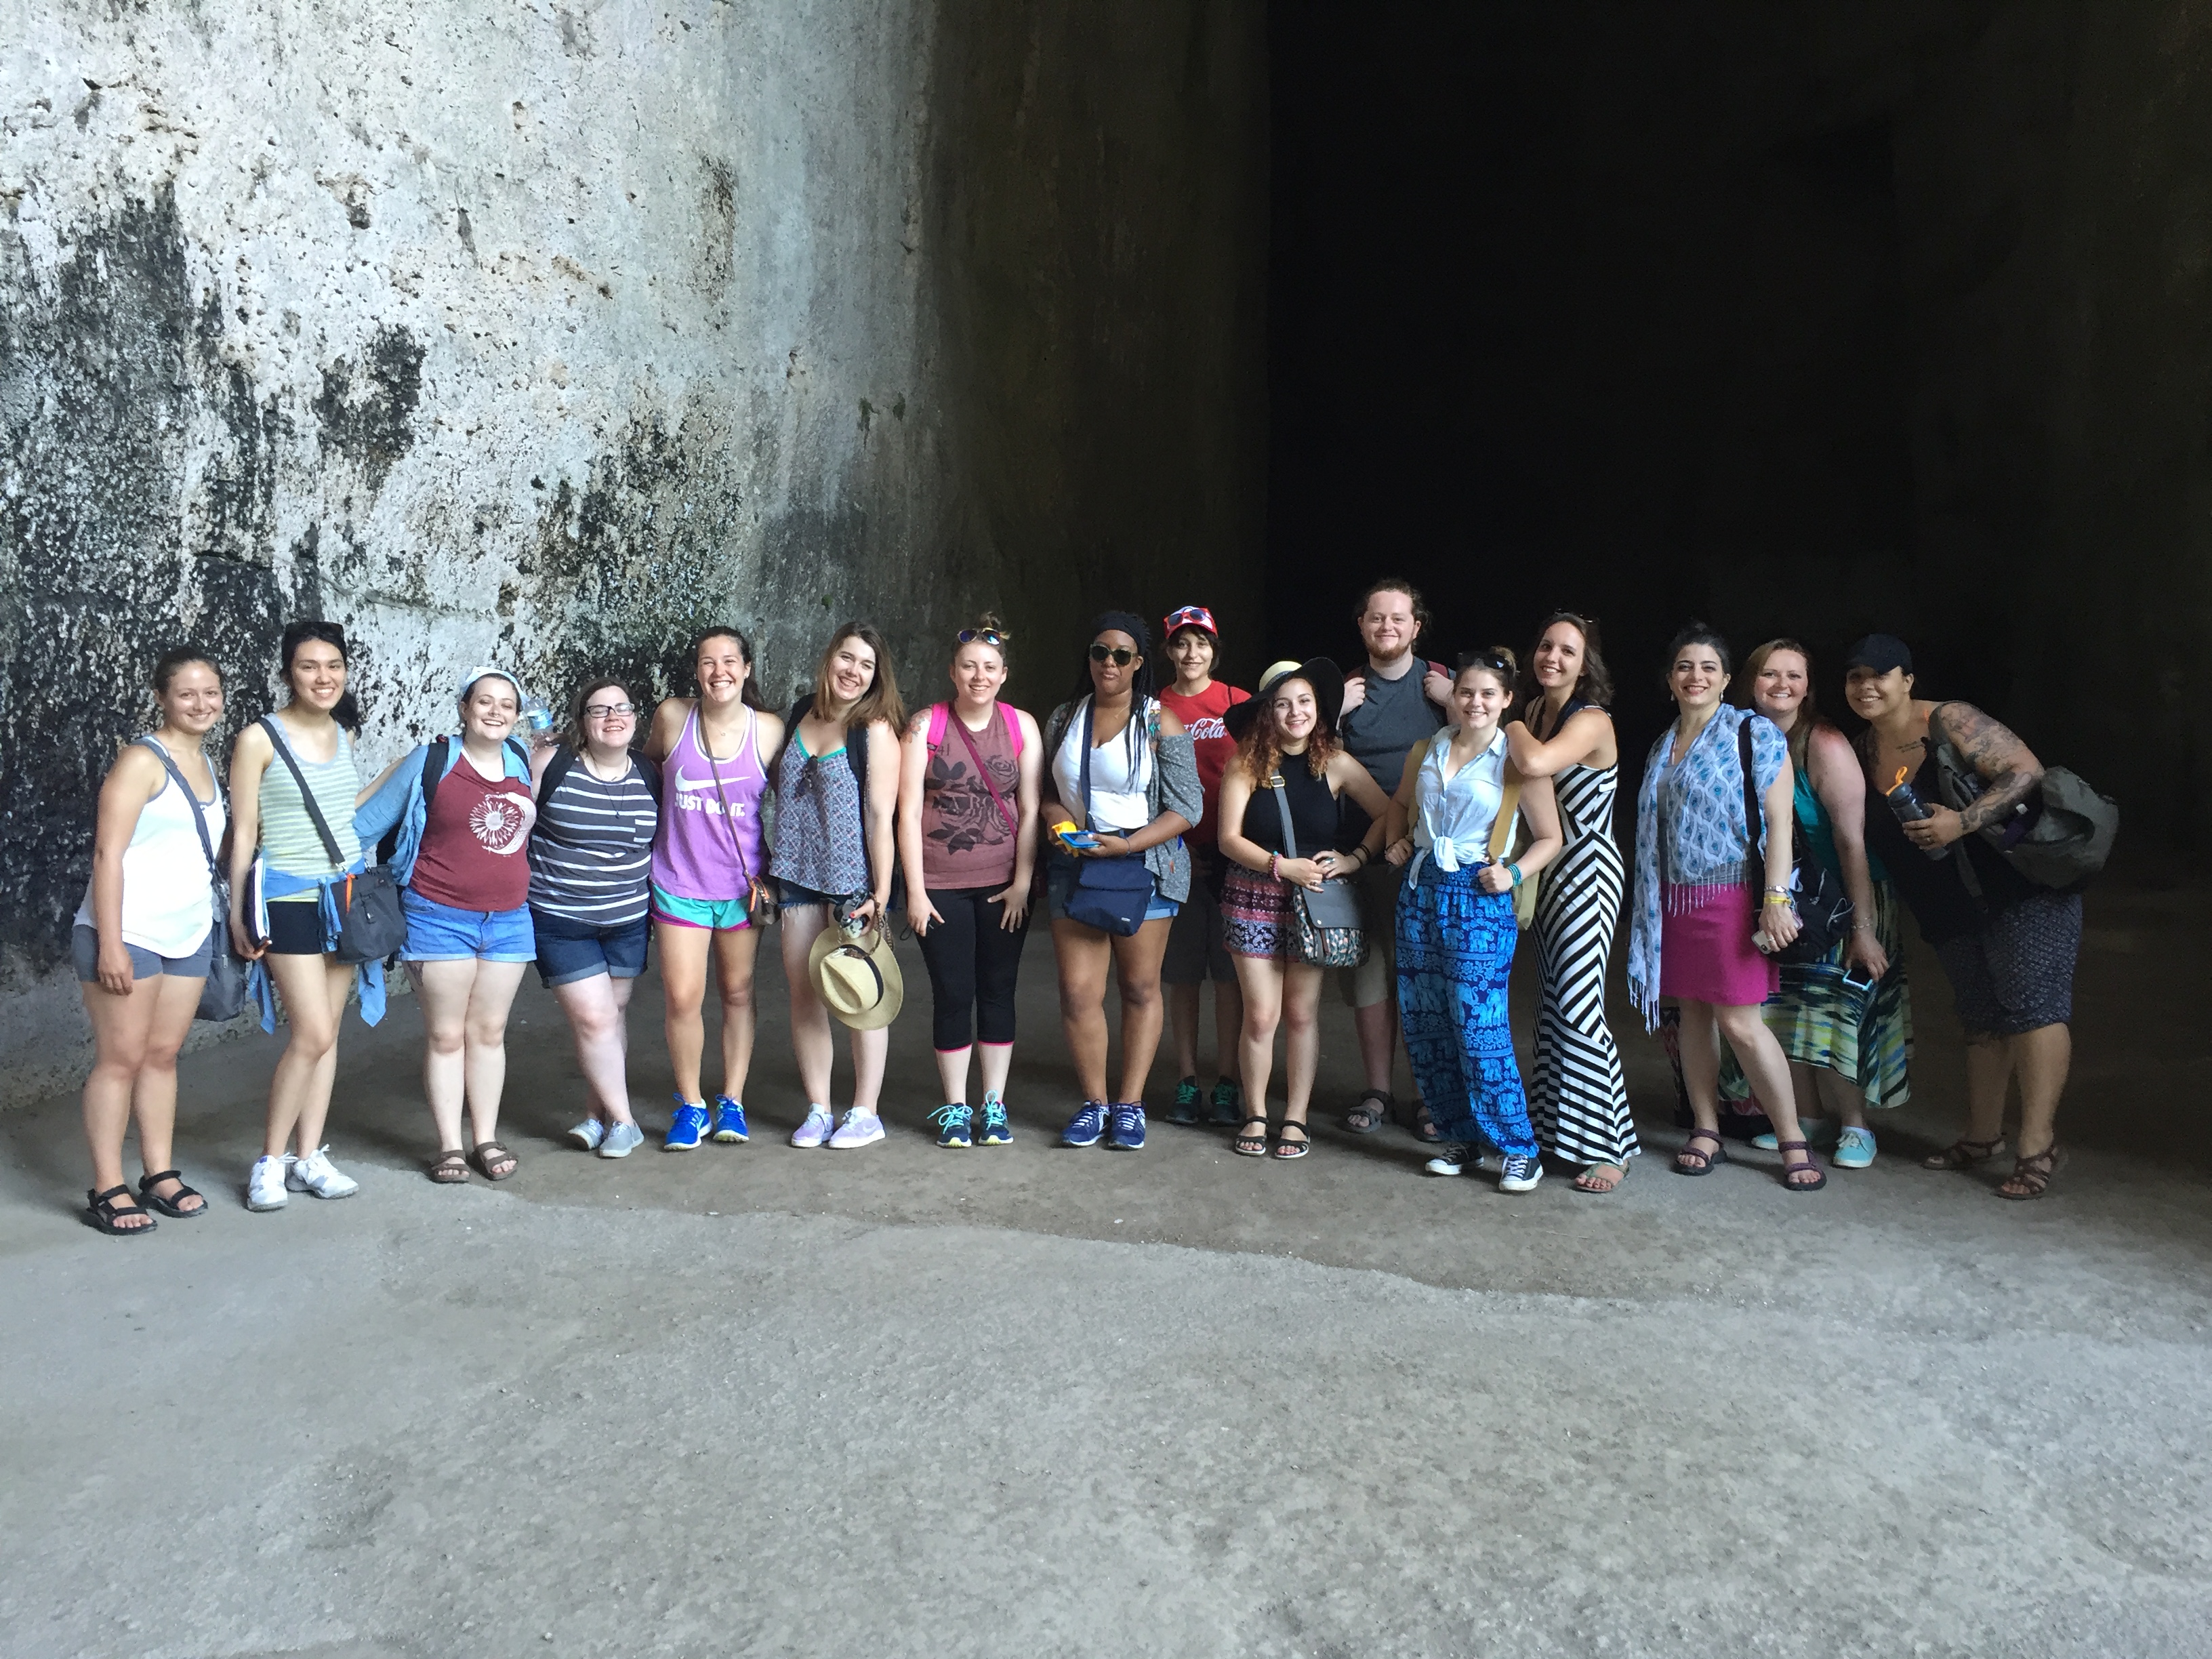 Group photo of 16 students from On-Site Studies in Art History Abroad Summer 2016 program, The Greeks in Ancient Italy. The students are posed at the mouth of an ancient rock quarry cave site in Syracuse, known as the 'Ear of Dionysios.' The cave is known for its exceptional acoustics: noises echo, but repeat only once. Ancient tyrants eavesdropped on prisoners they held captive here.